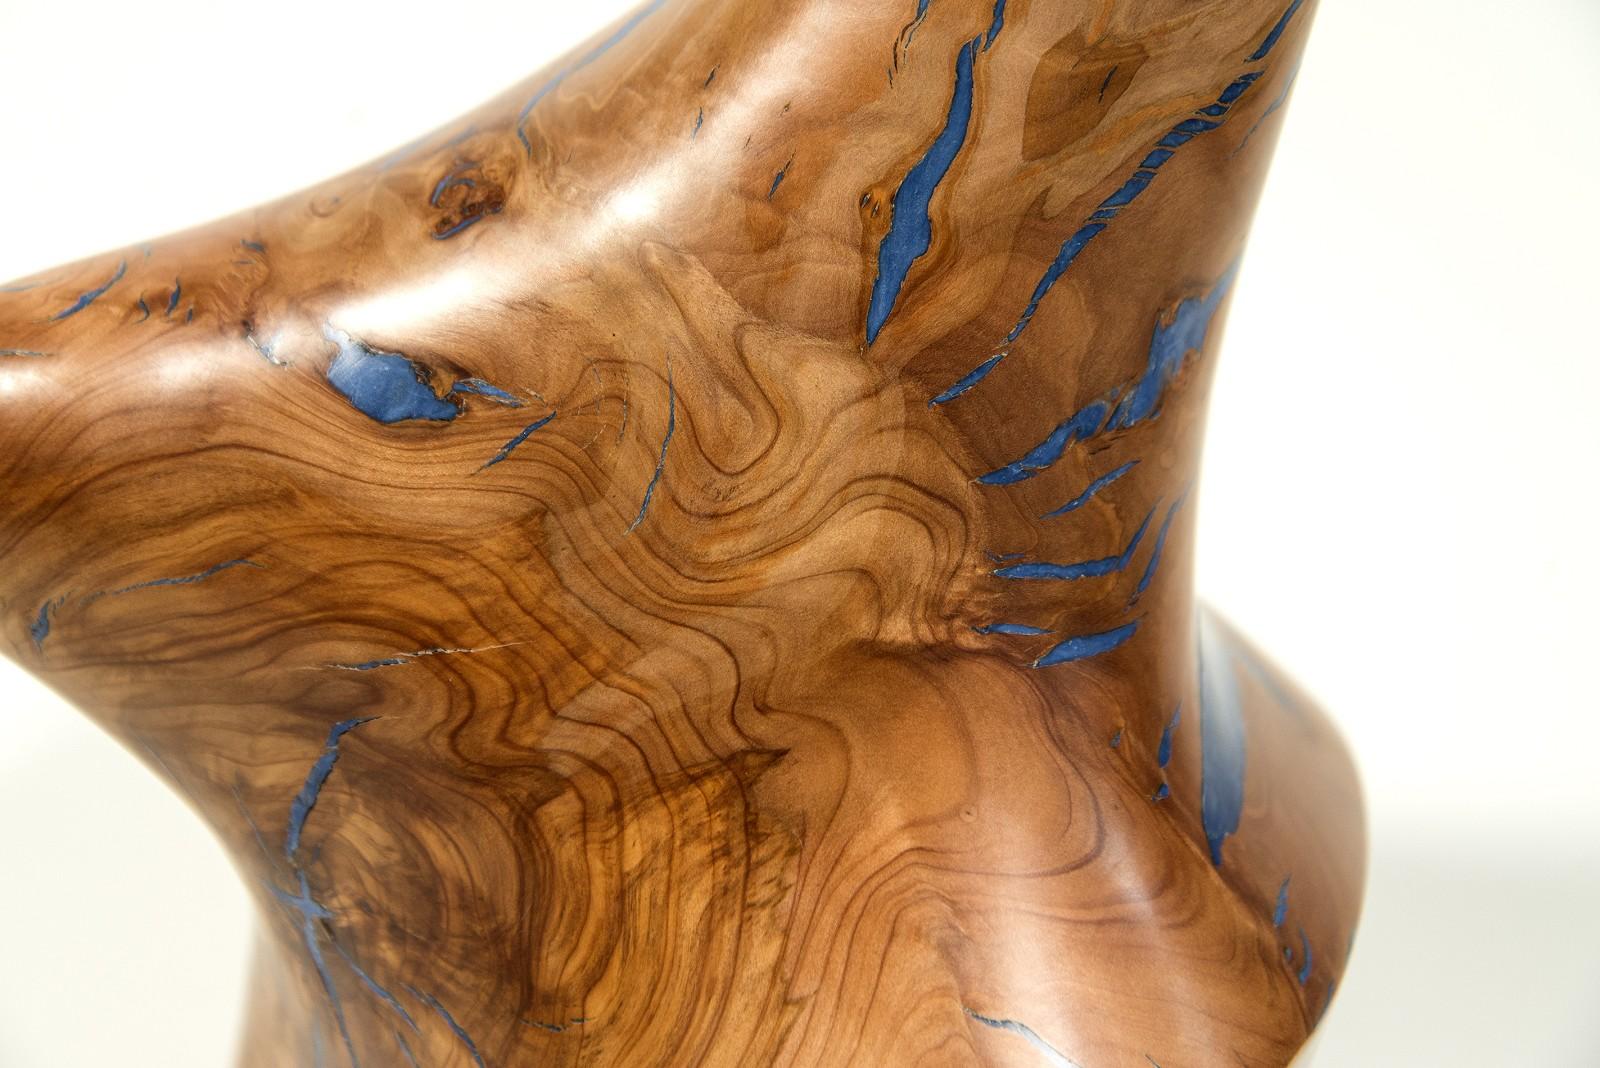 Windfall Series II No 8 - smooth, carved, abstract, Applewood & resin sculpture For Sale 2